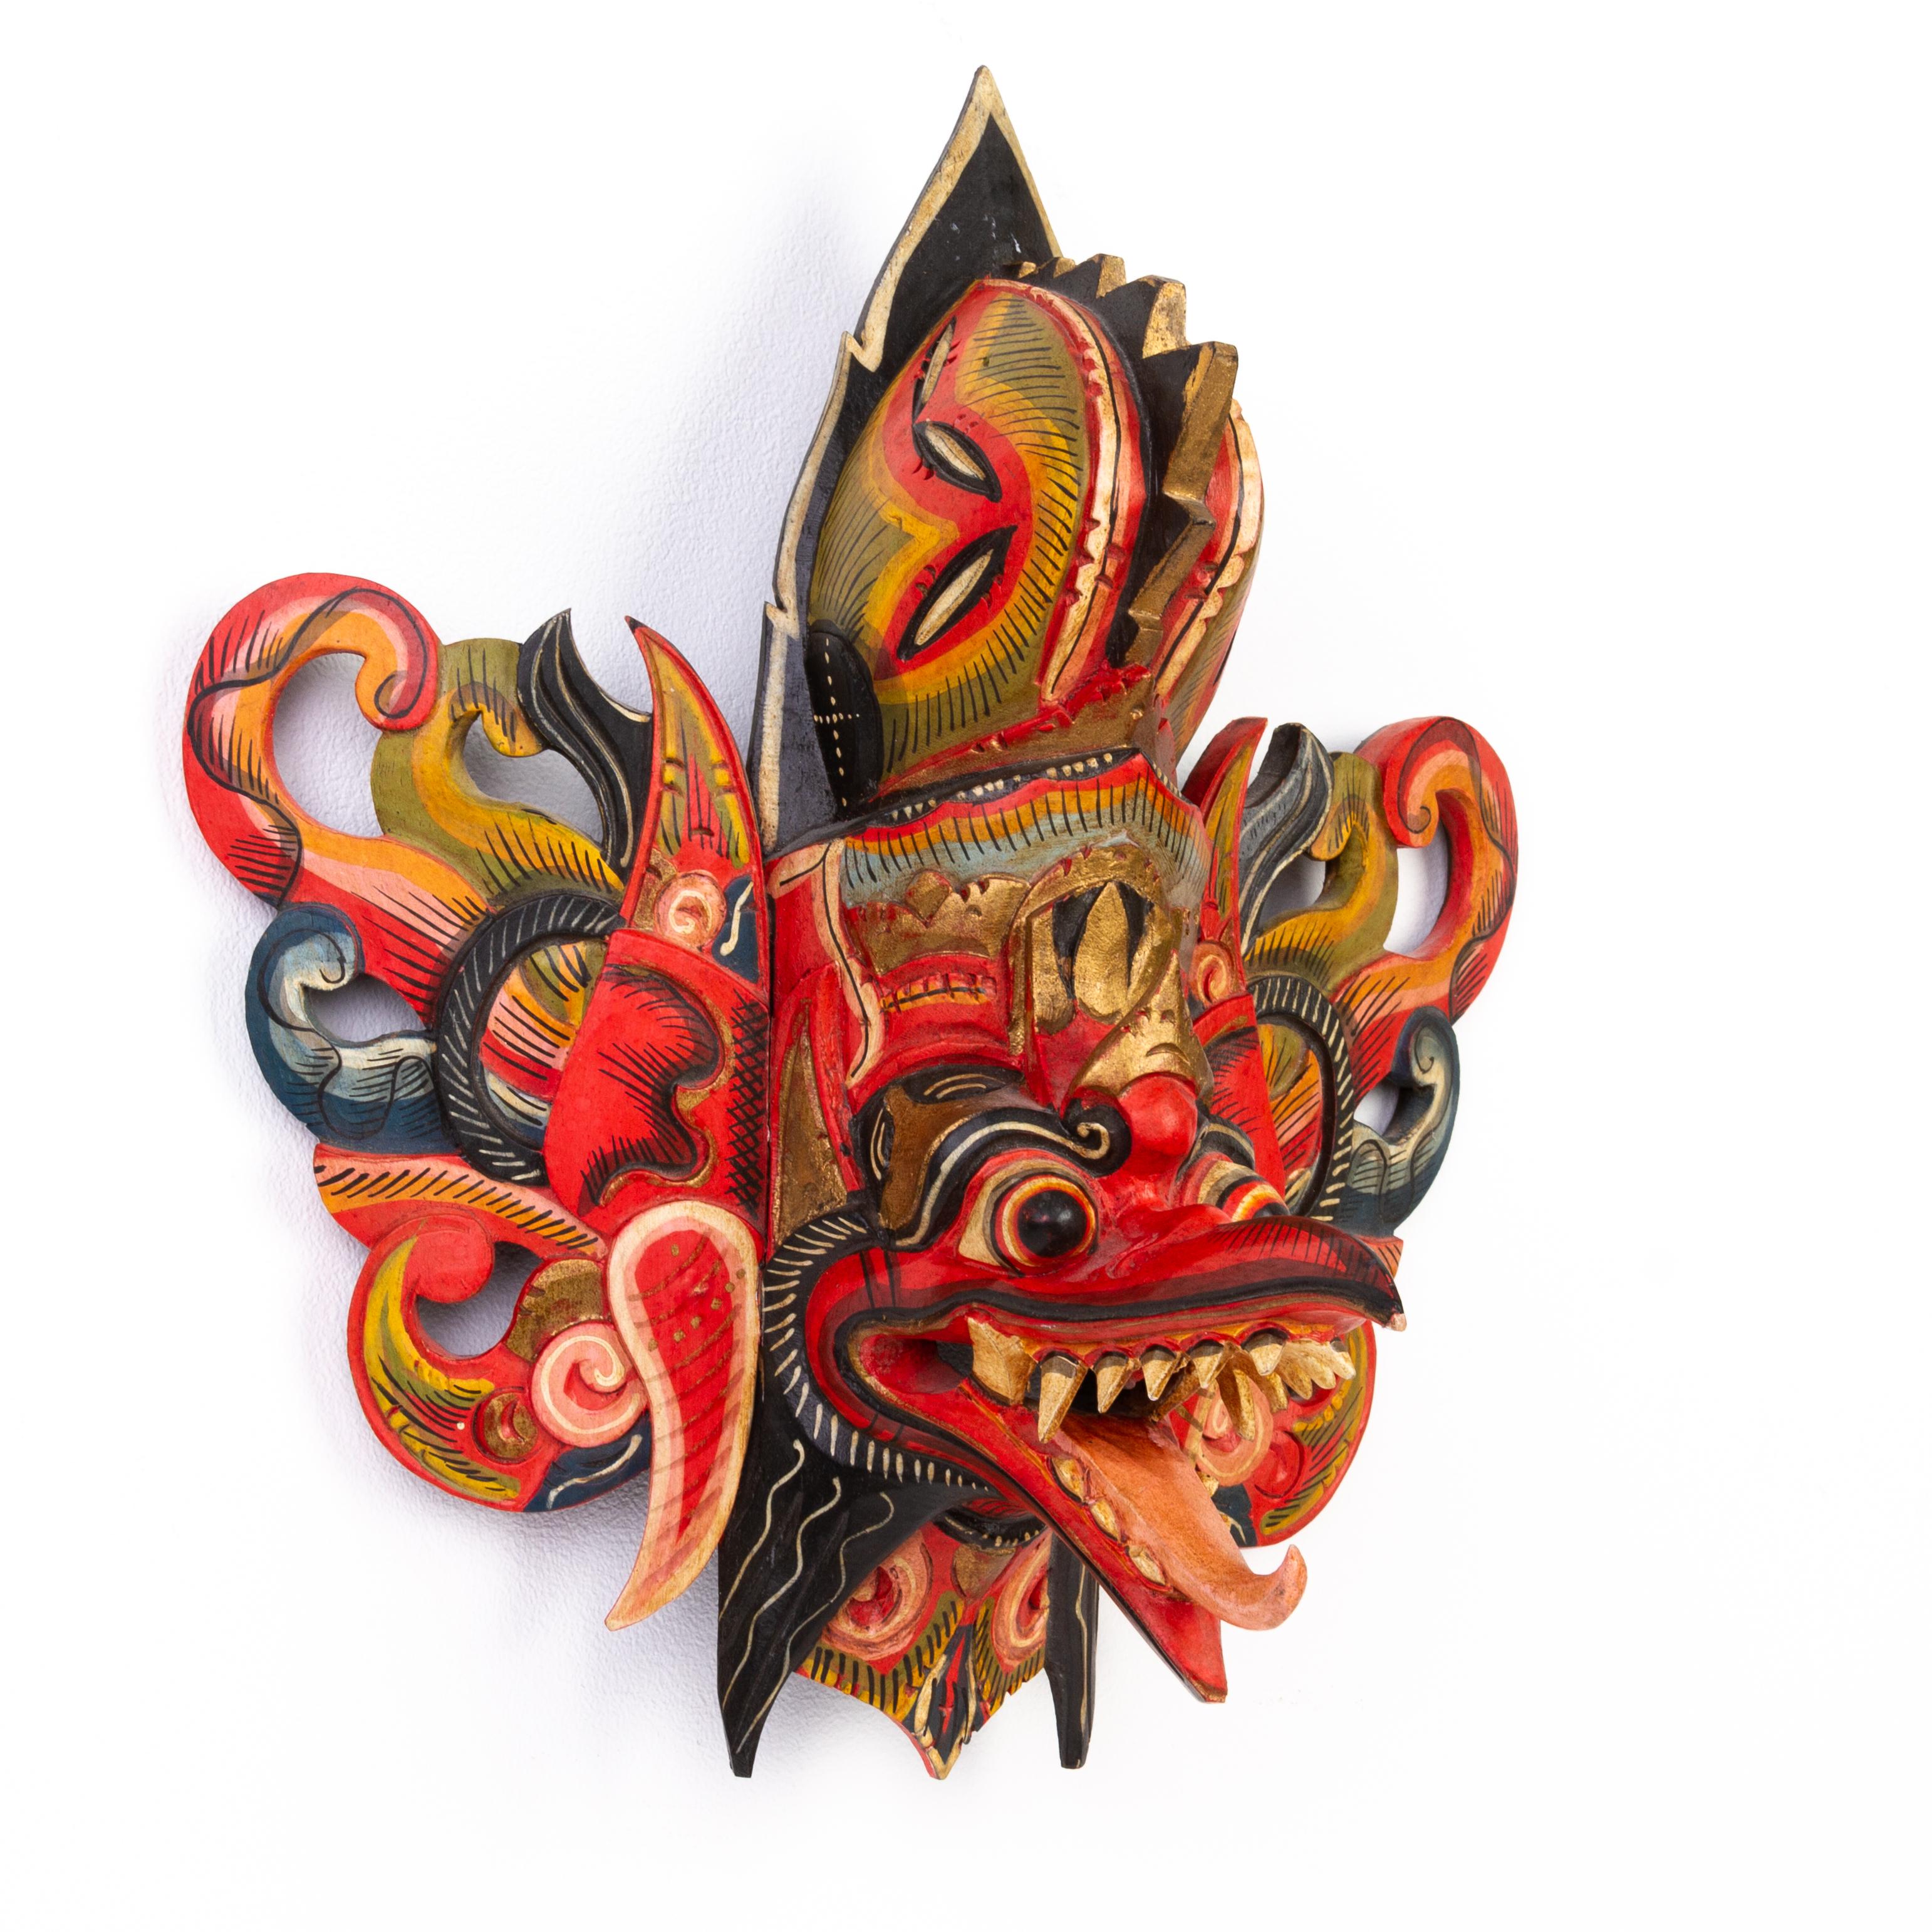 2nd half of the 20th century, a Balinese mask made of polychromed light wood, ready to hang. Vibrant colours and well carved.